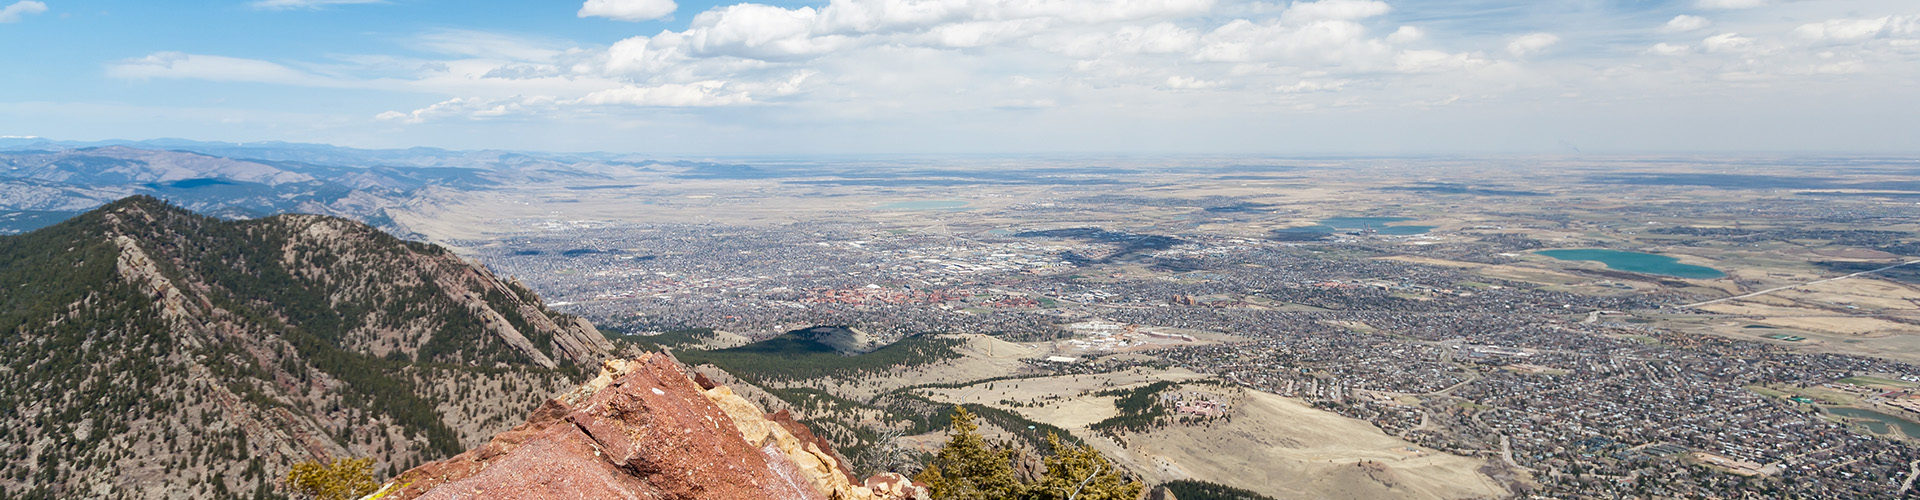 Panoramic view of Boulder, Colorado from the top of a Mountain